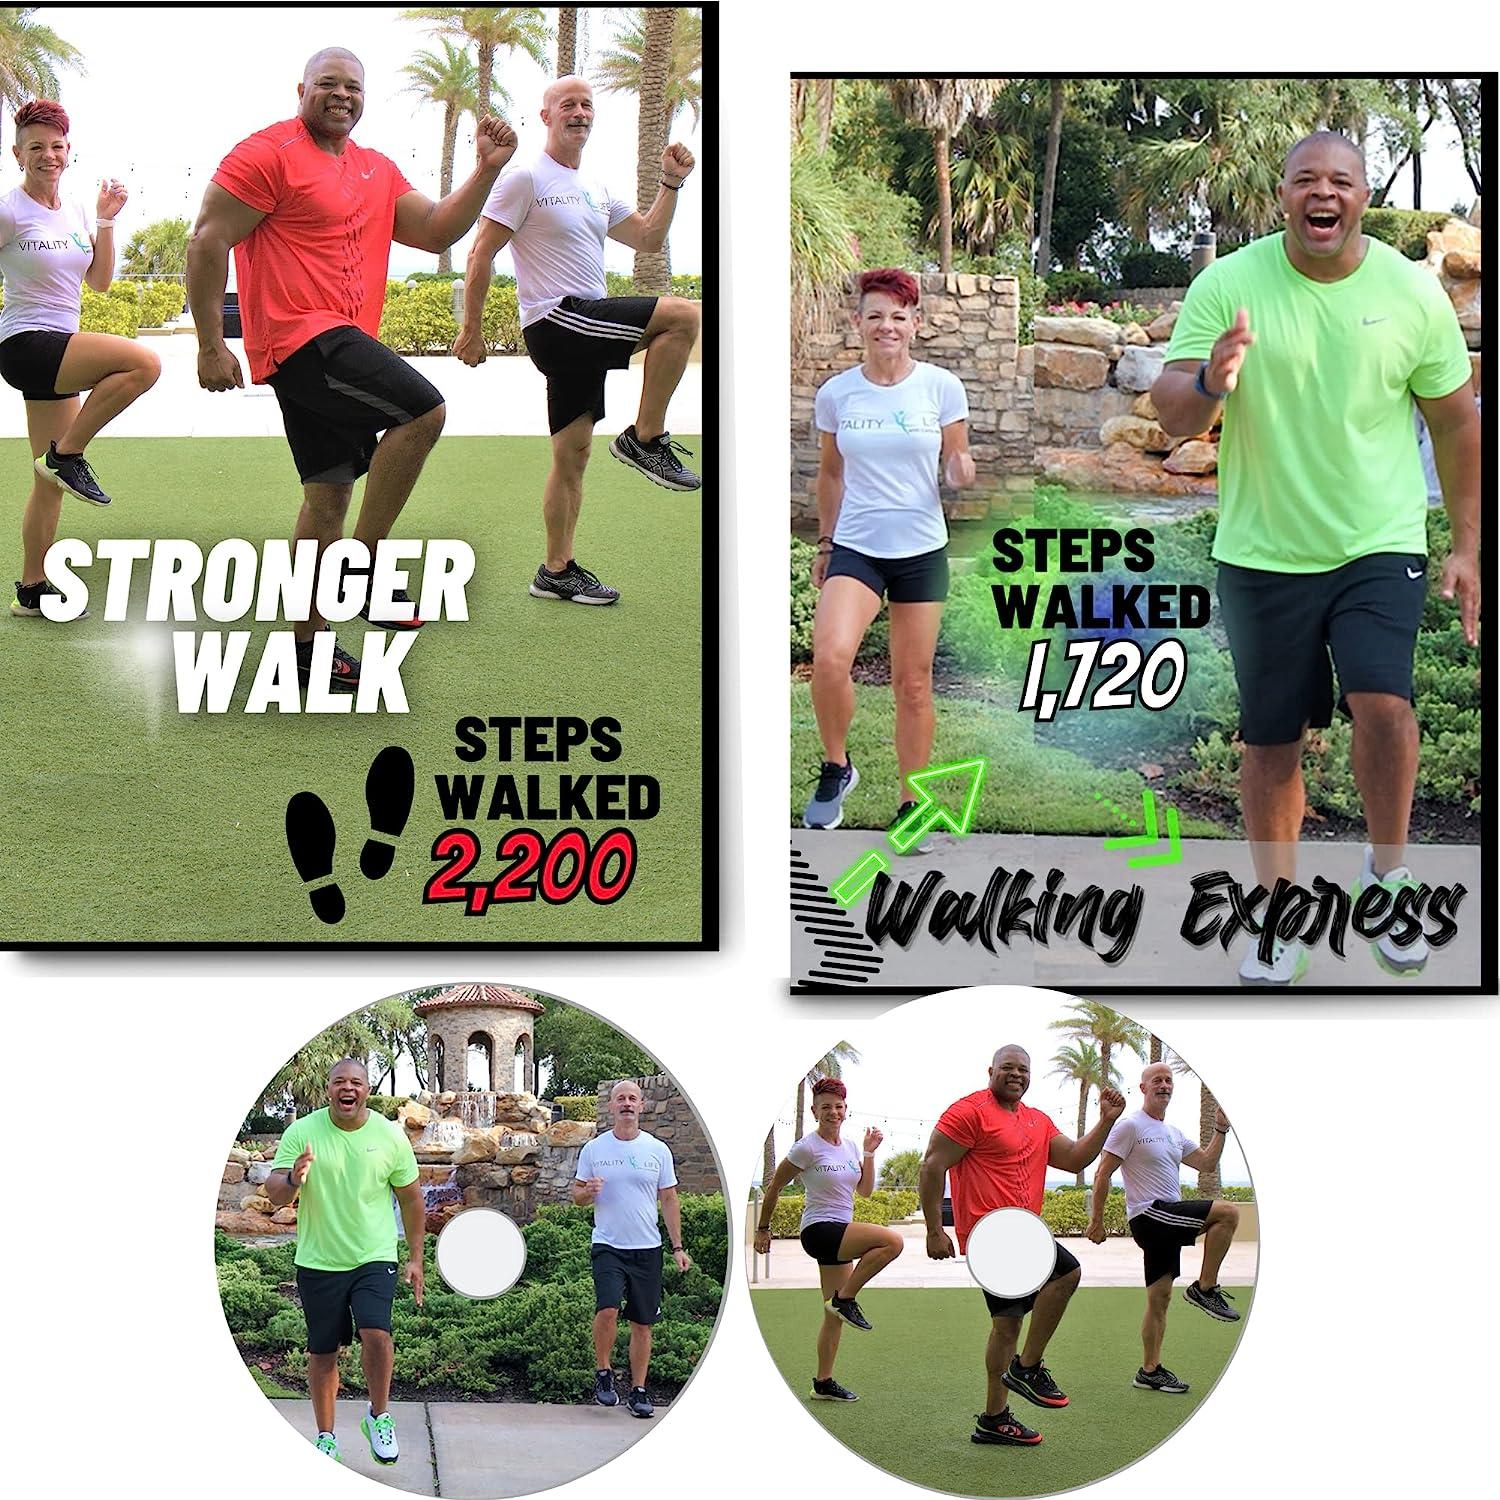 WALK FITNESS DVD - Walk off the weight & feel great! Maximize your